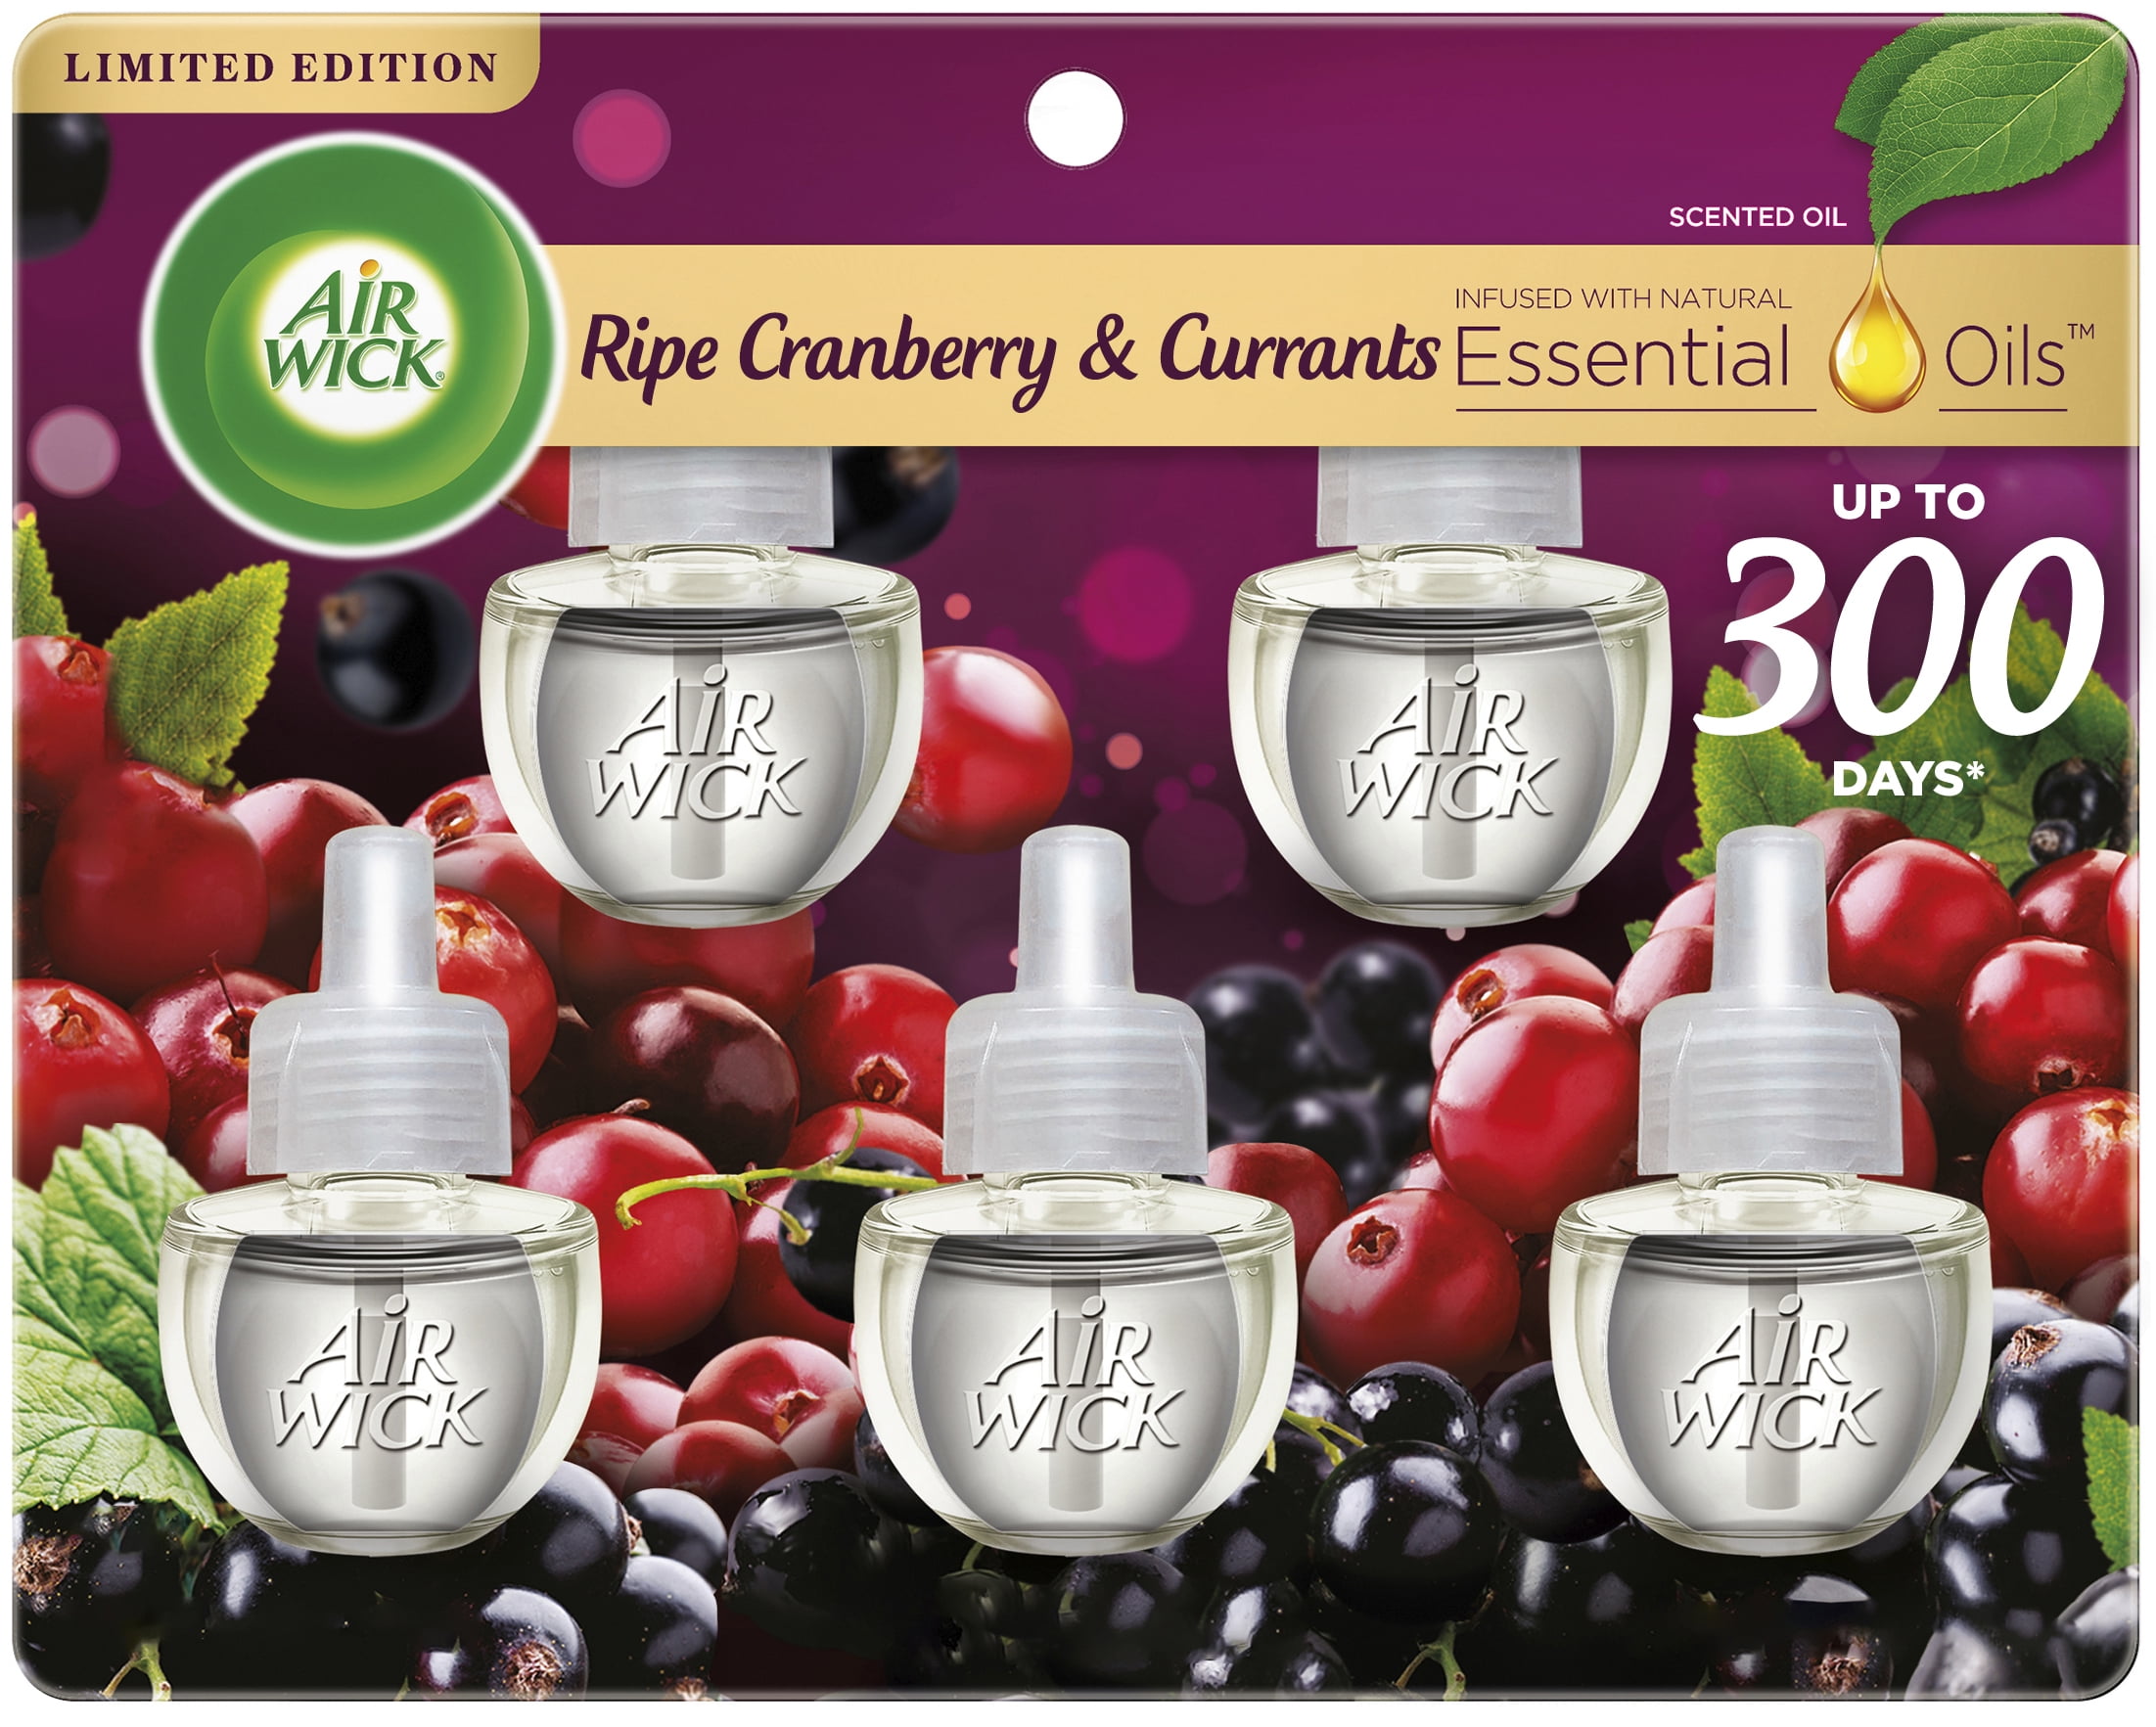 Air Wick Plug in Scented Oil Refill, 5 ct, Ripe Cranberry and Currants, Air Freshener, Essential Oils, Fall Scent, Fall decor